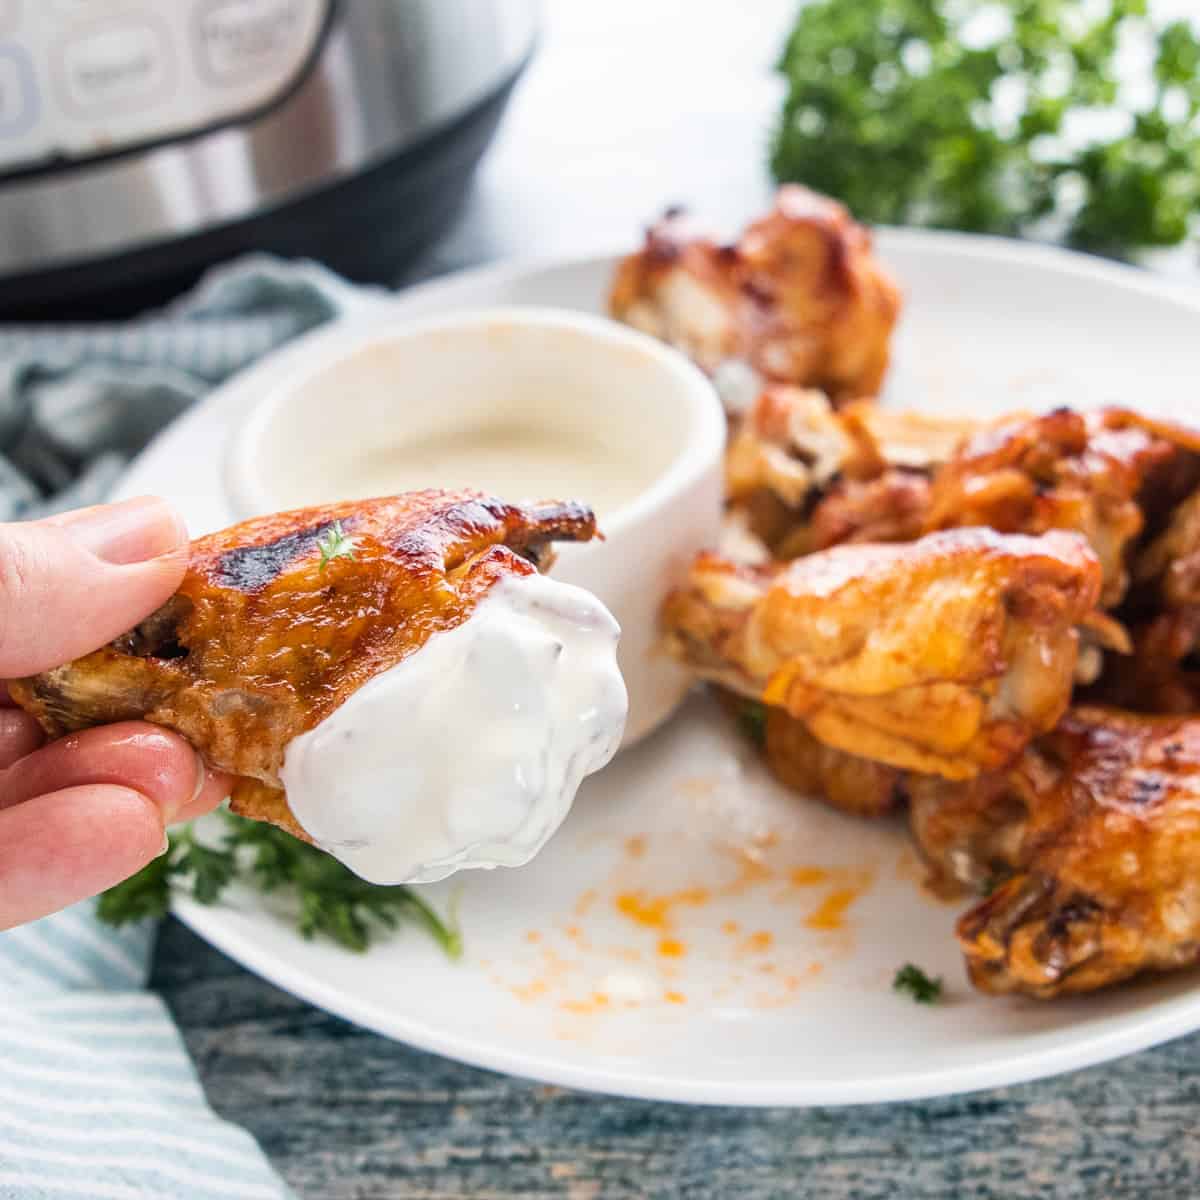 A crisp chicken wing dipped in blue cheese dressing shown up close with an instant pot in the background.